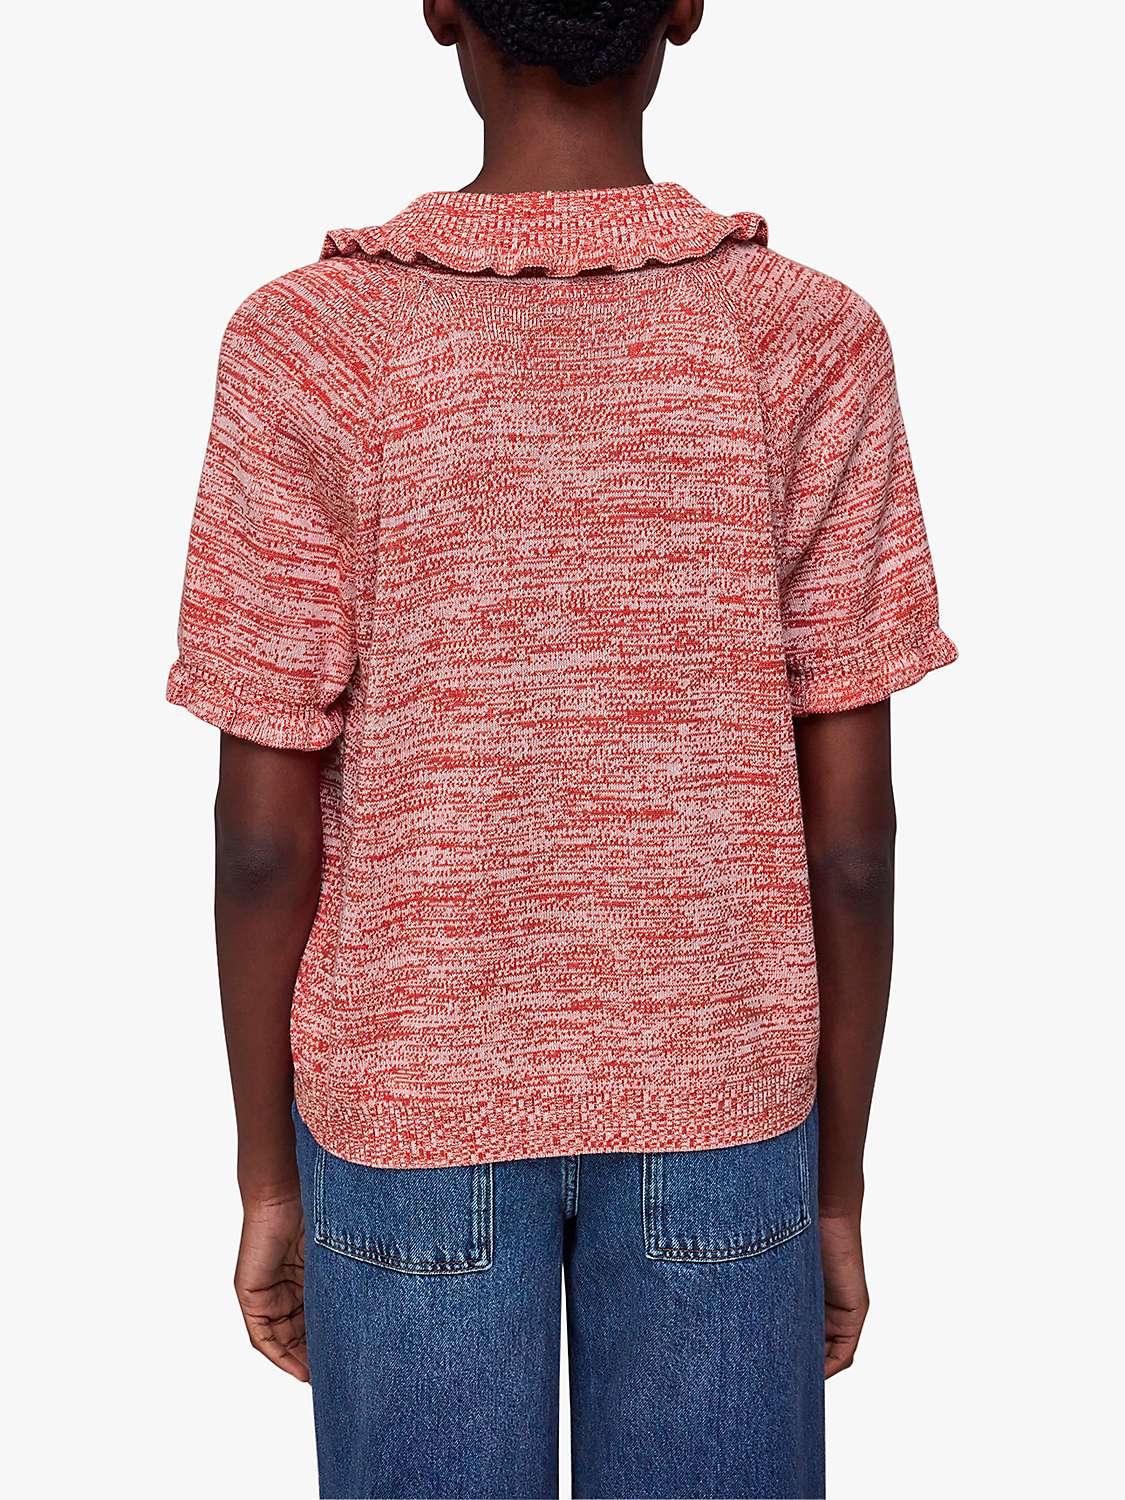 Buy Whistles Frill Collar Short Sleeve Knit, Pink/Multi Online at johnlewis.com